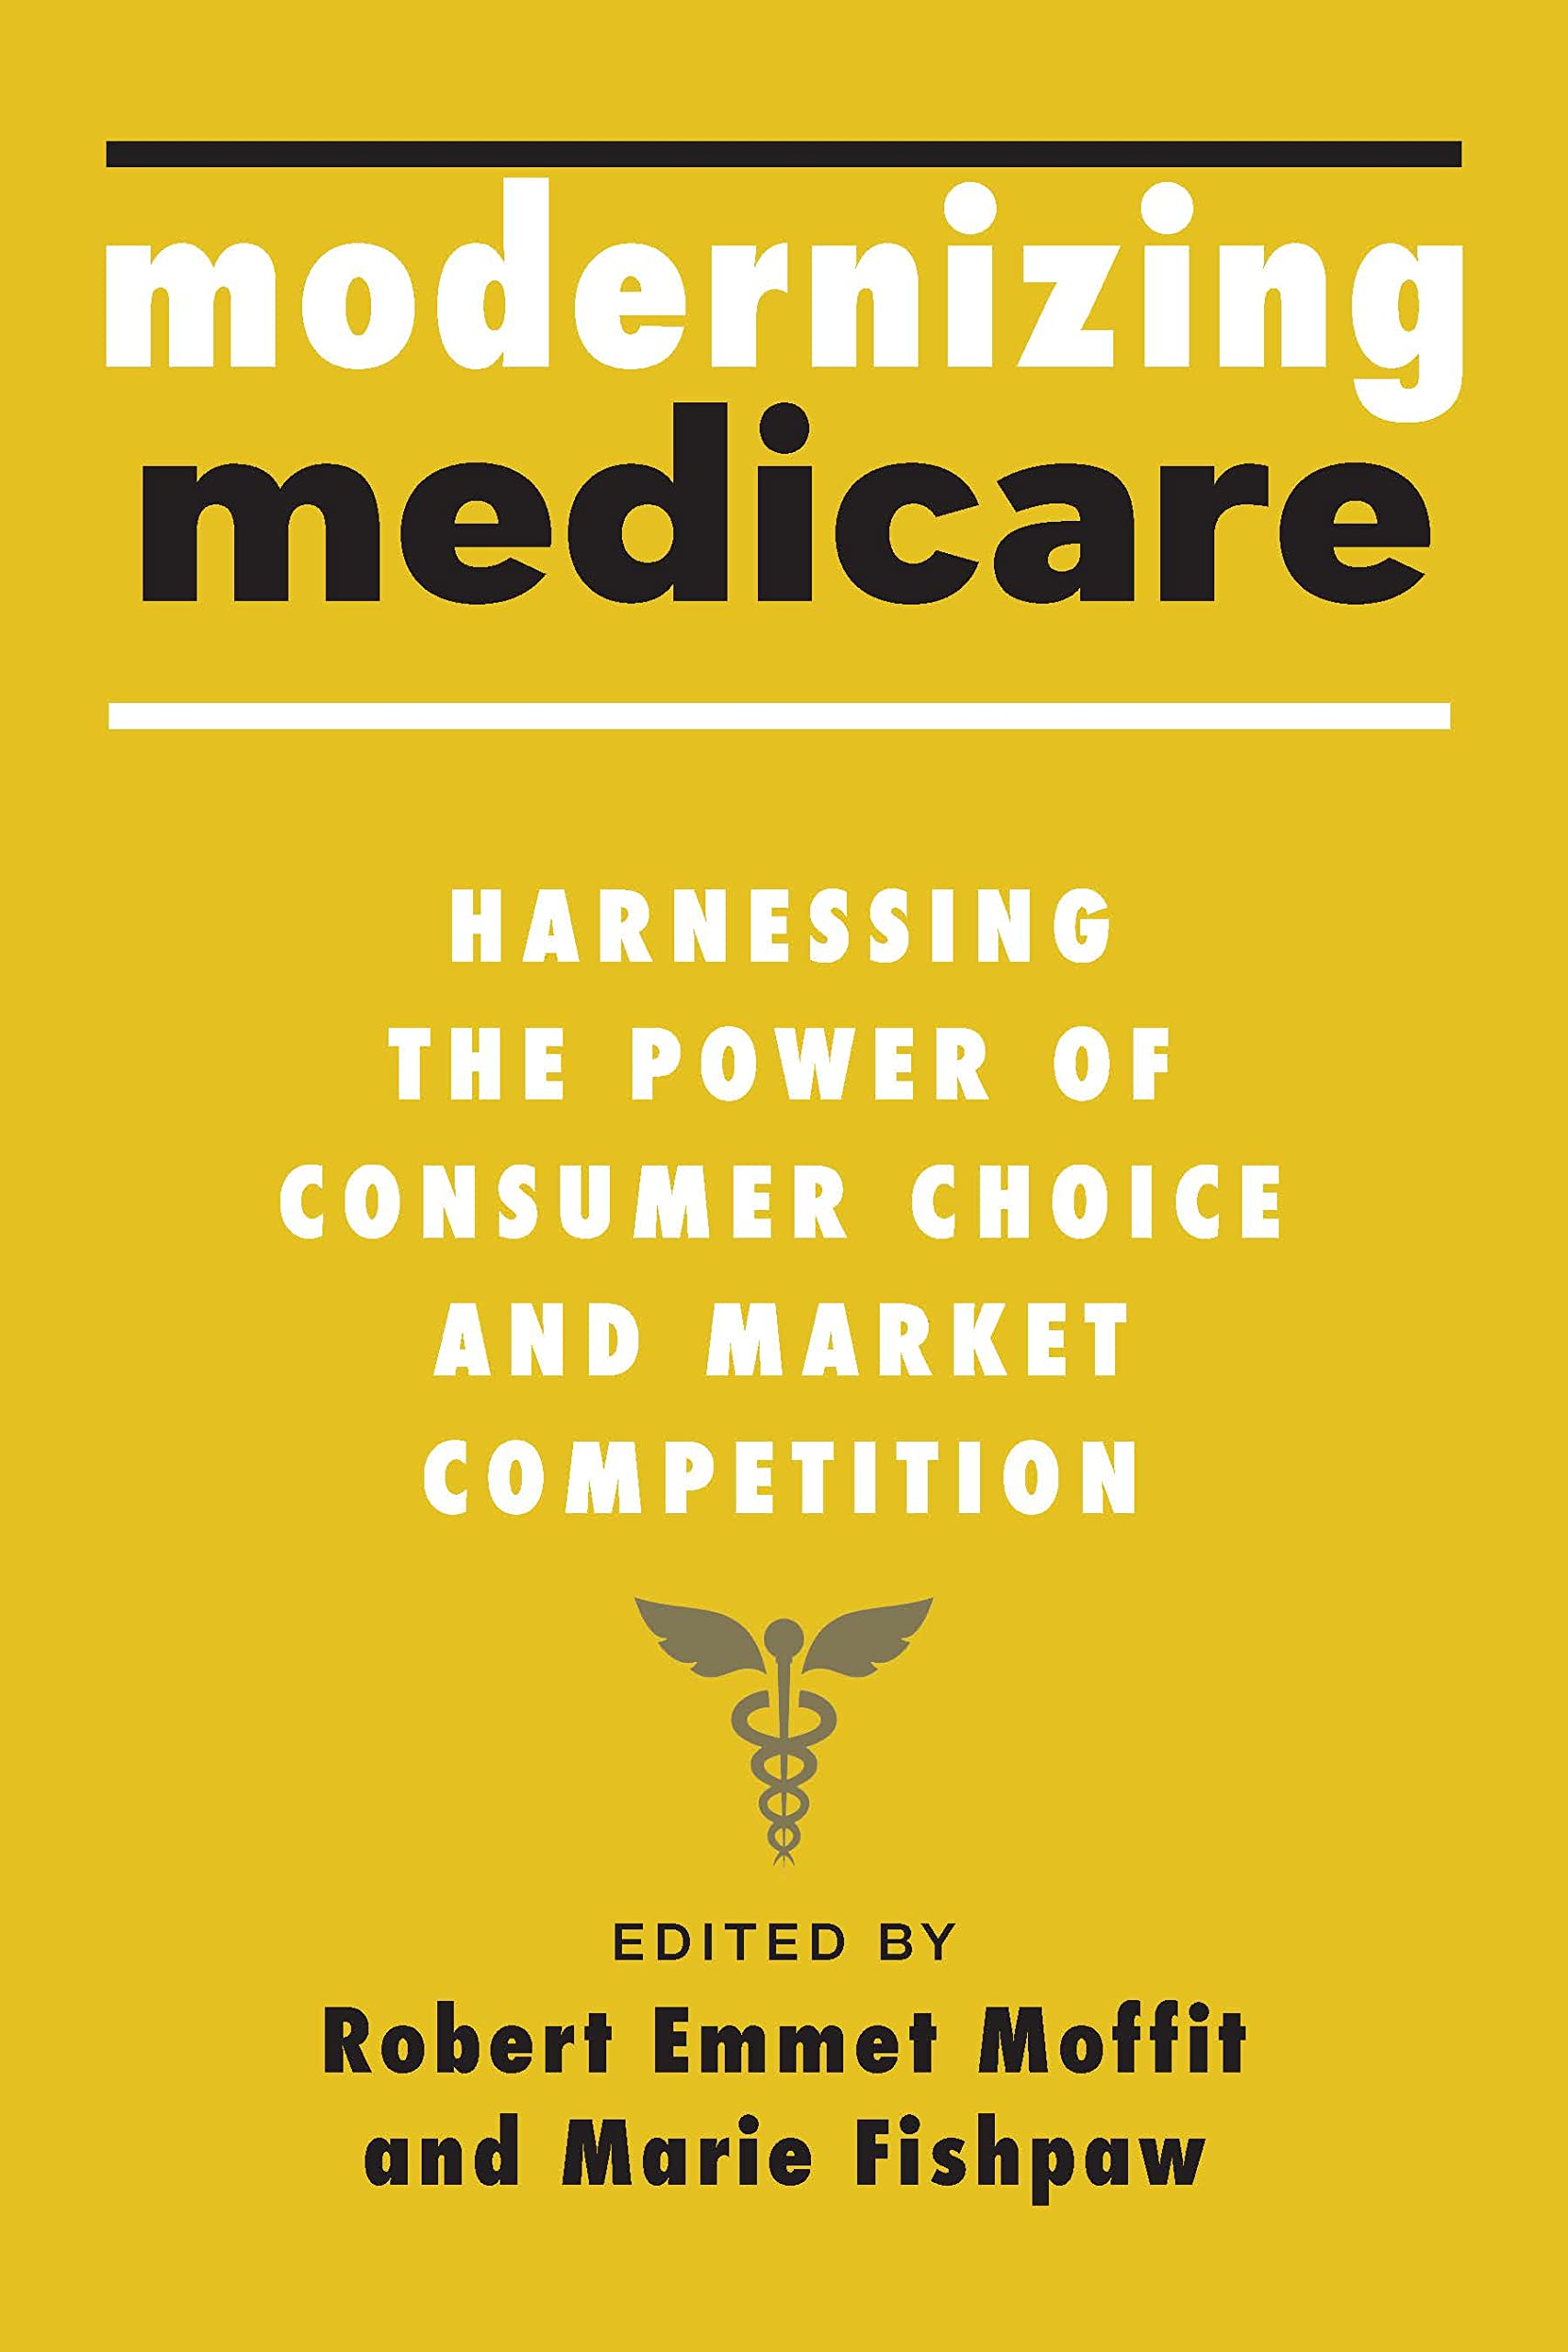 https://www.amazon.com/Modernizing-Medicare-Harnessing-Consumer-Competition/dp/1421446022?asin=1421446022&revisionId=&format=4&depth=1